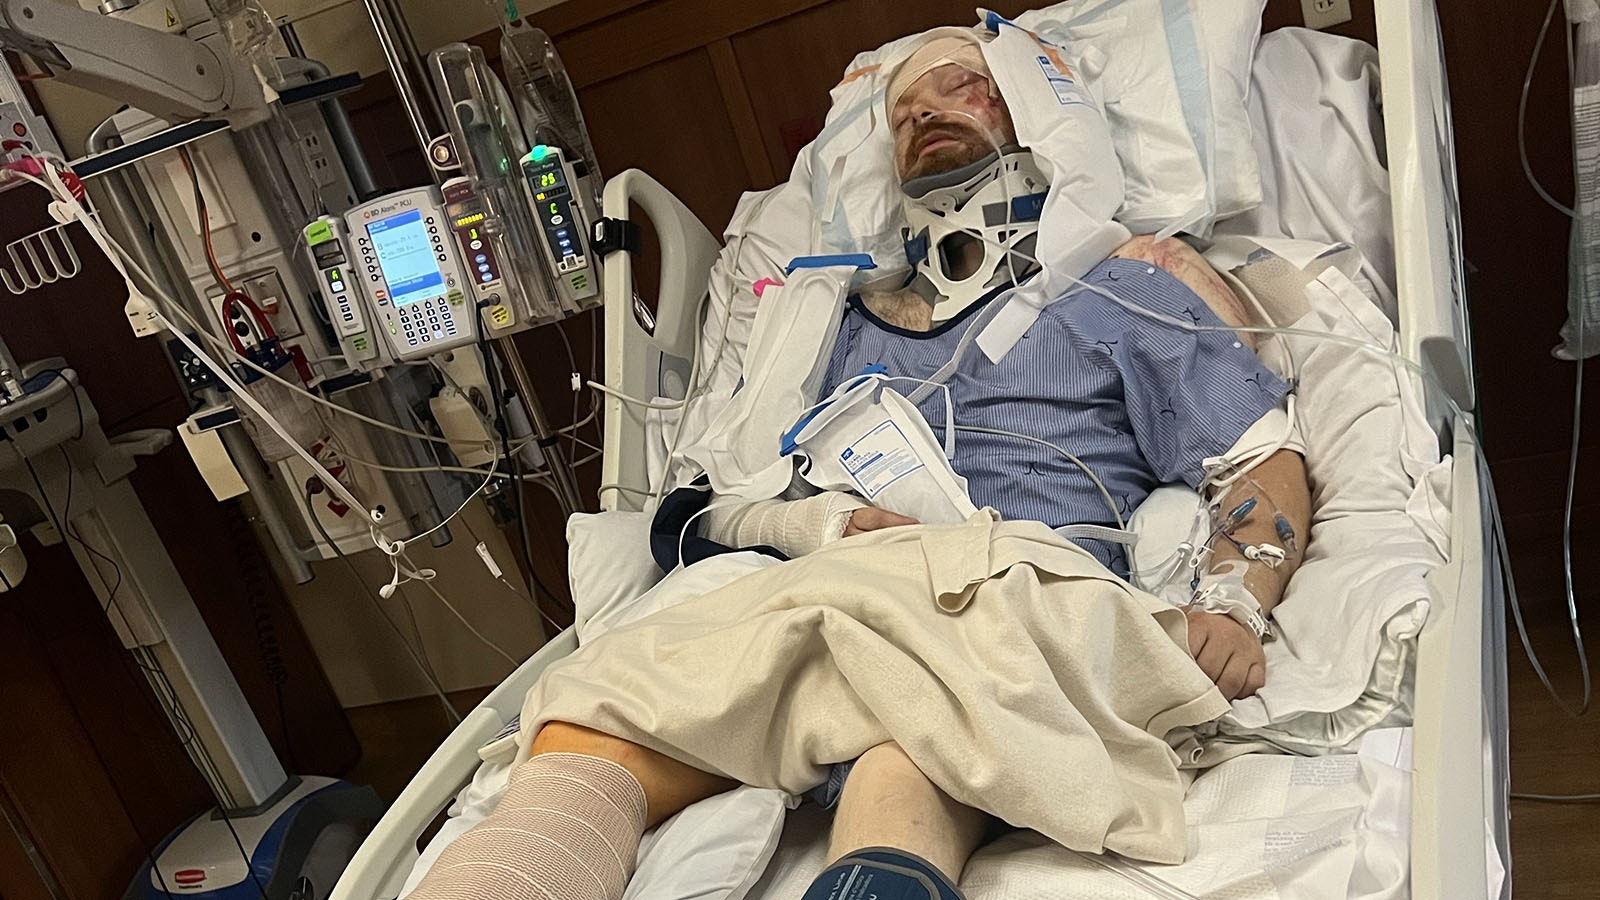 After suffering numerous serious injures in a side-by-side rollover crash in Park County this month, Skyler Peterson faces a long road to recovery.